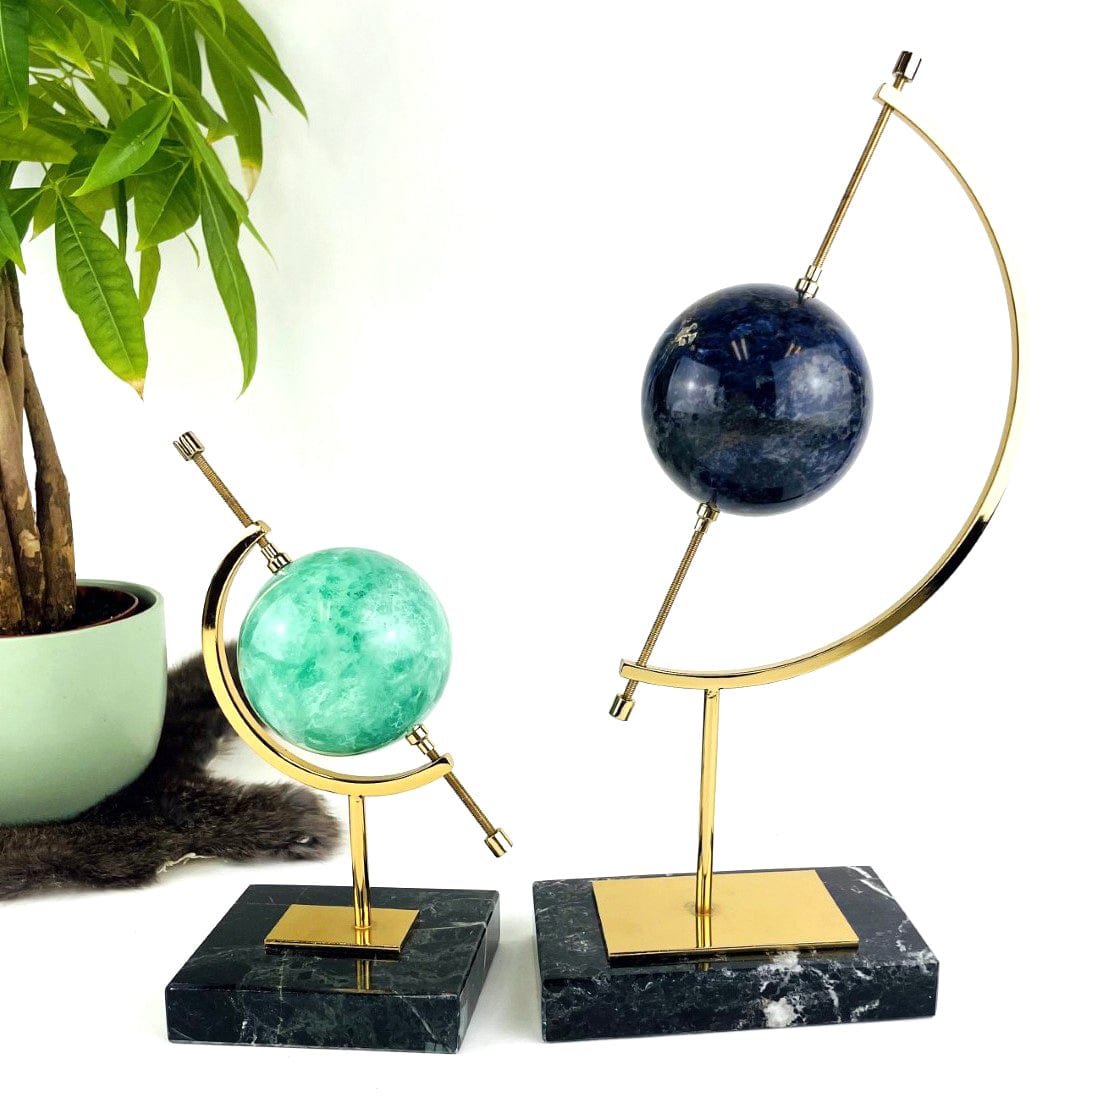 2 Sphere Holders with Caliper with decorations in the background